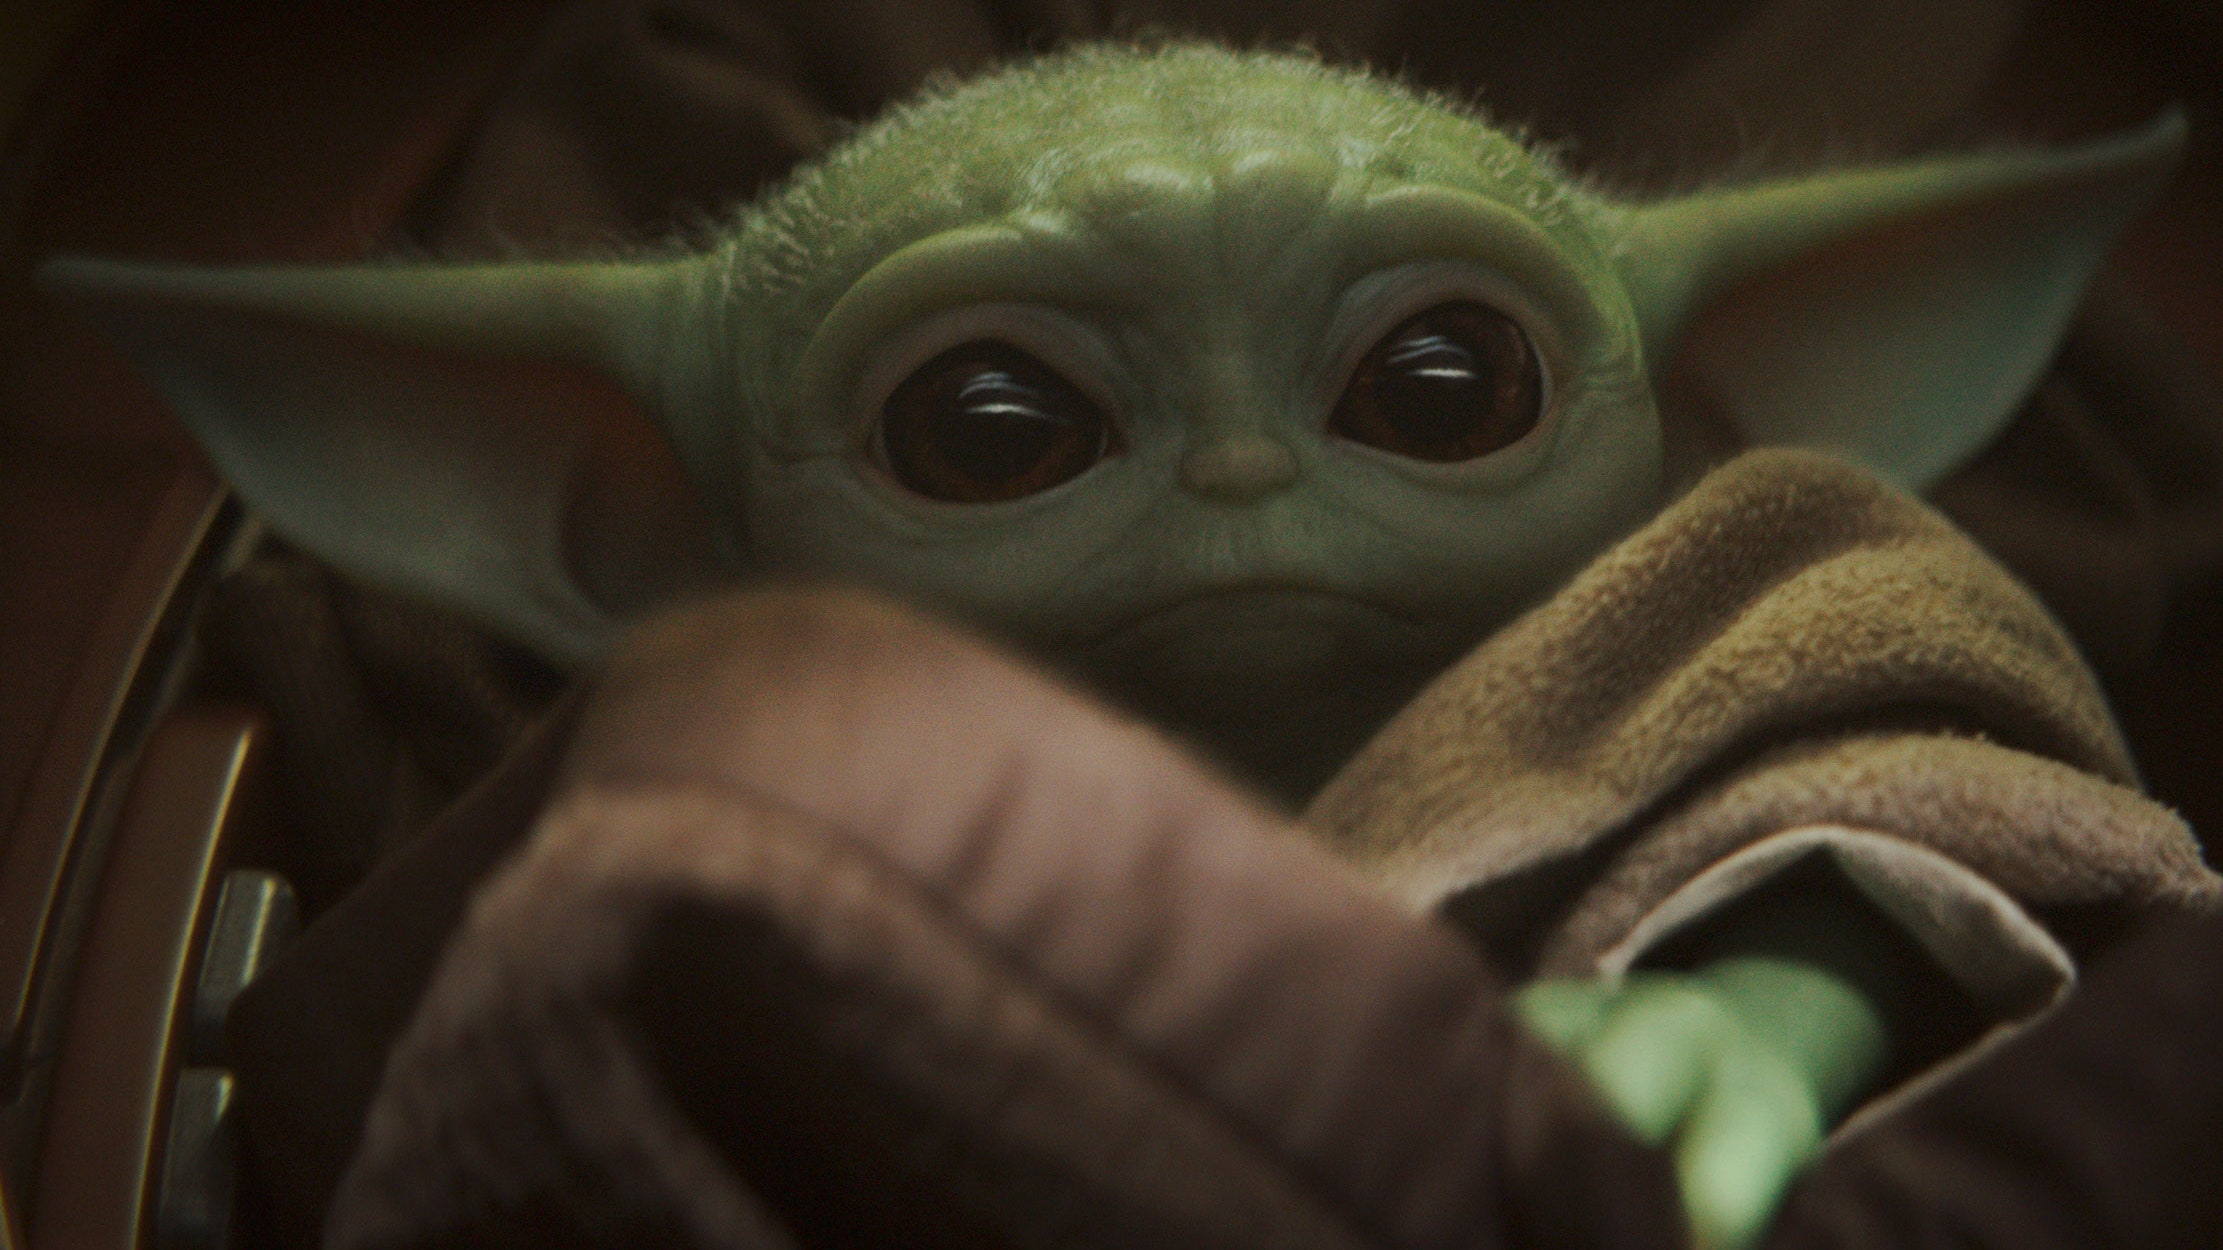 Which planet was The Child (Baby Yoda) found on?